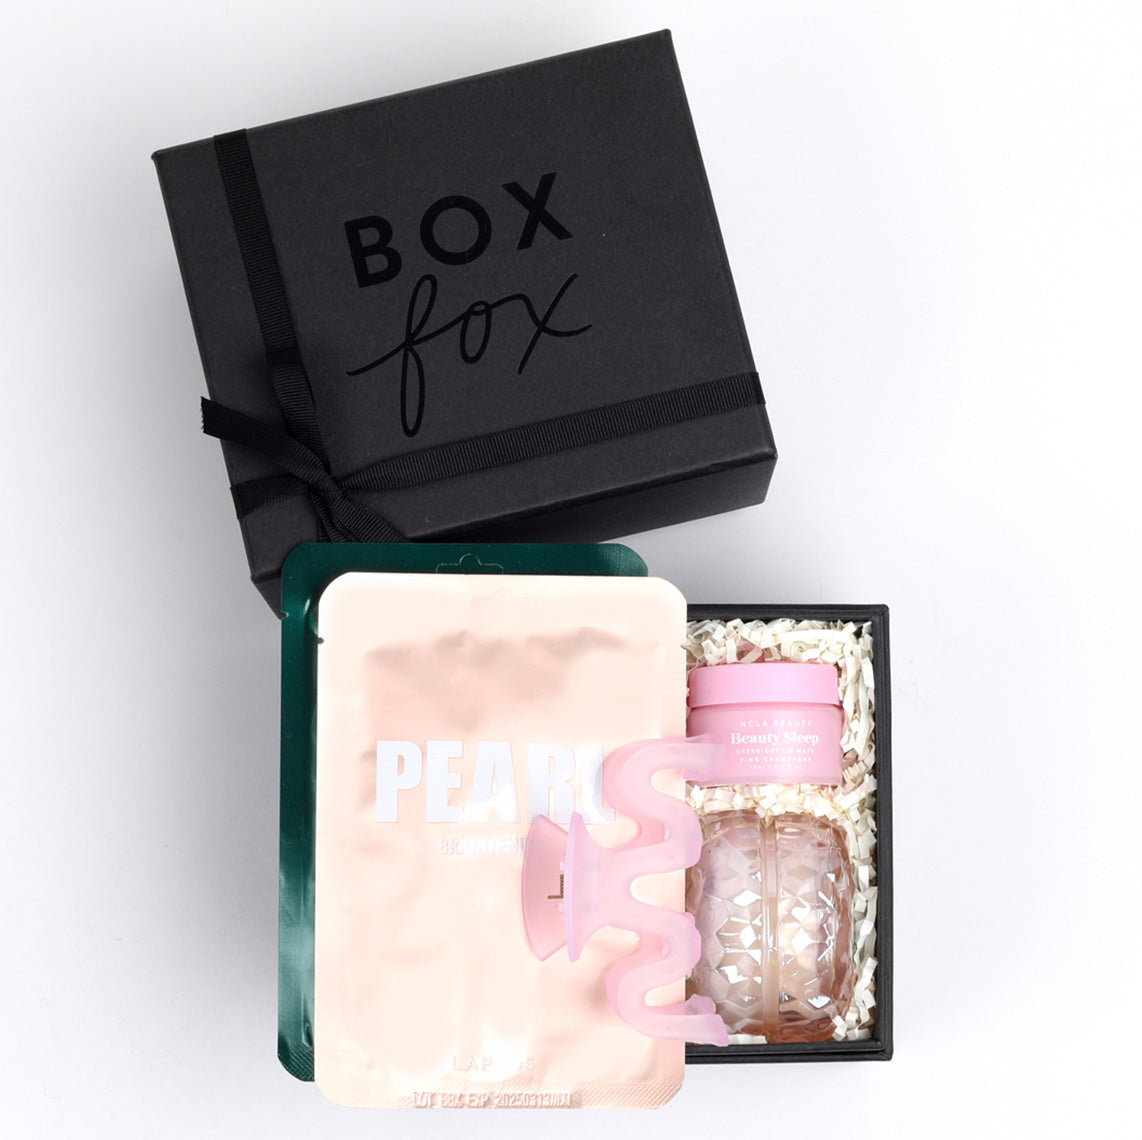 Mini Black BOXFOX gift box packed with 2 lapcos face masks, a pink squiggle hair clip, and ncla lip mask